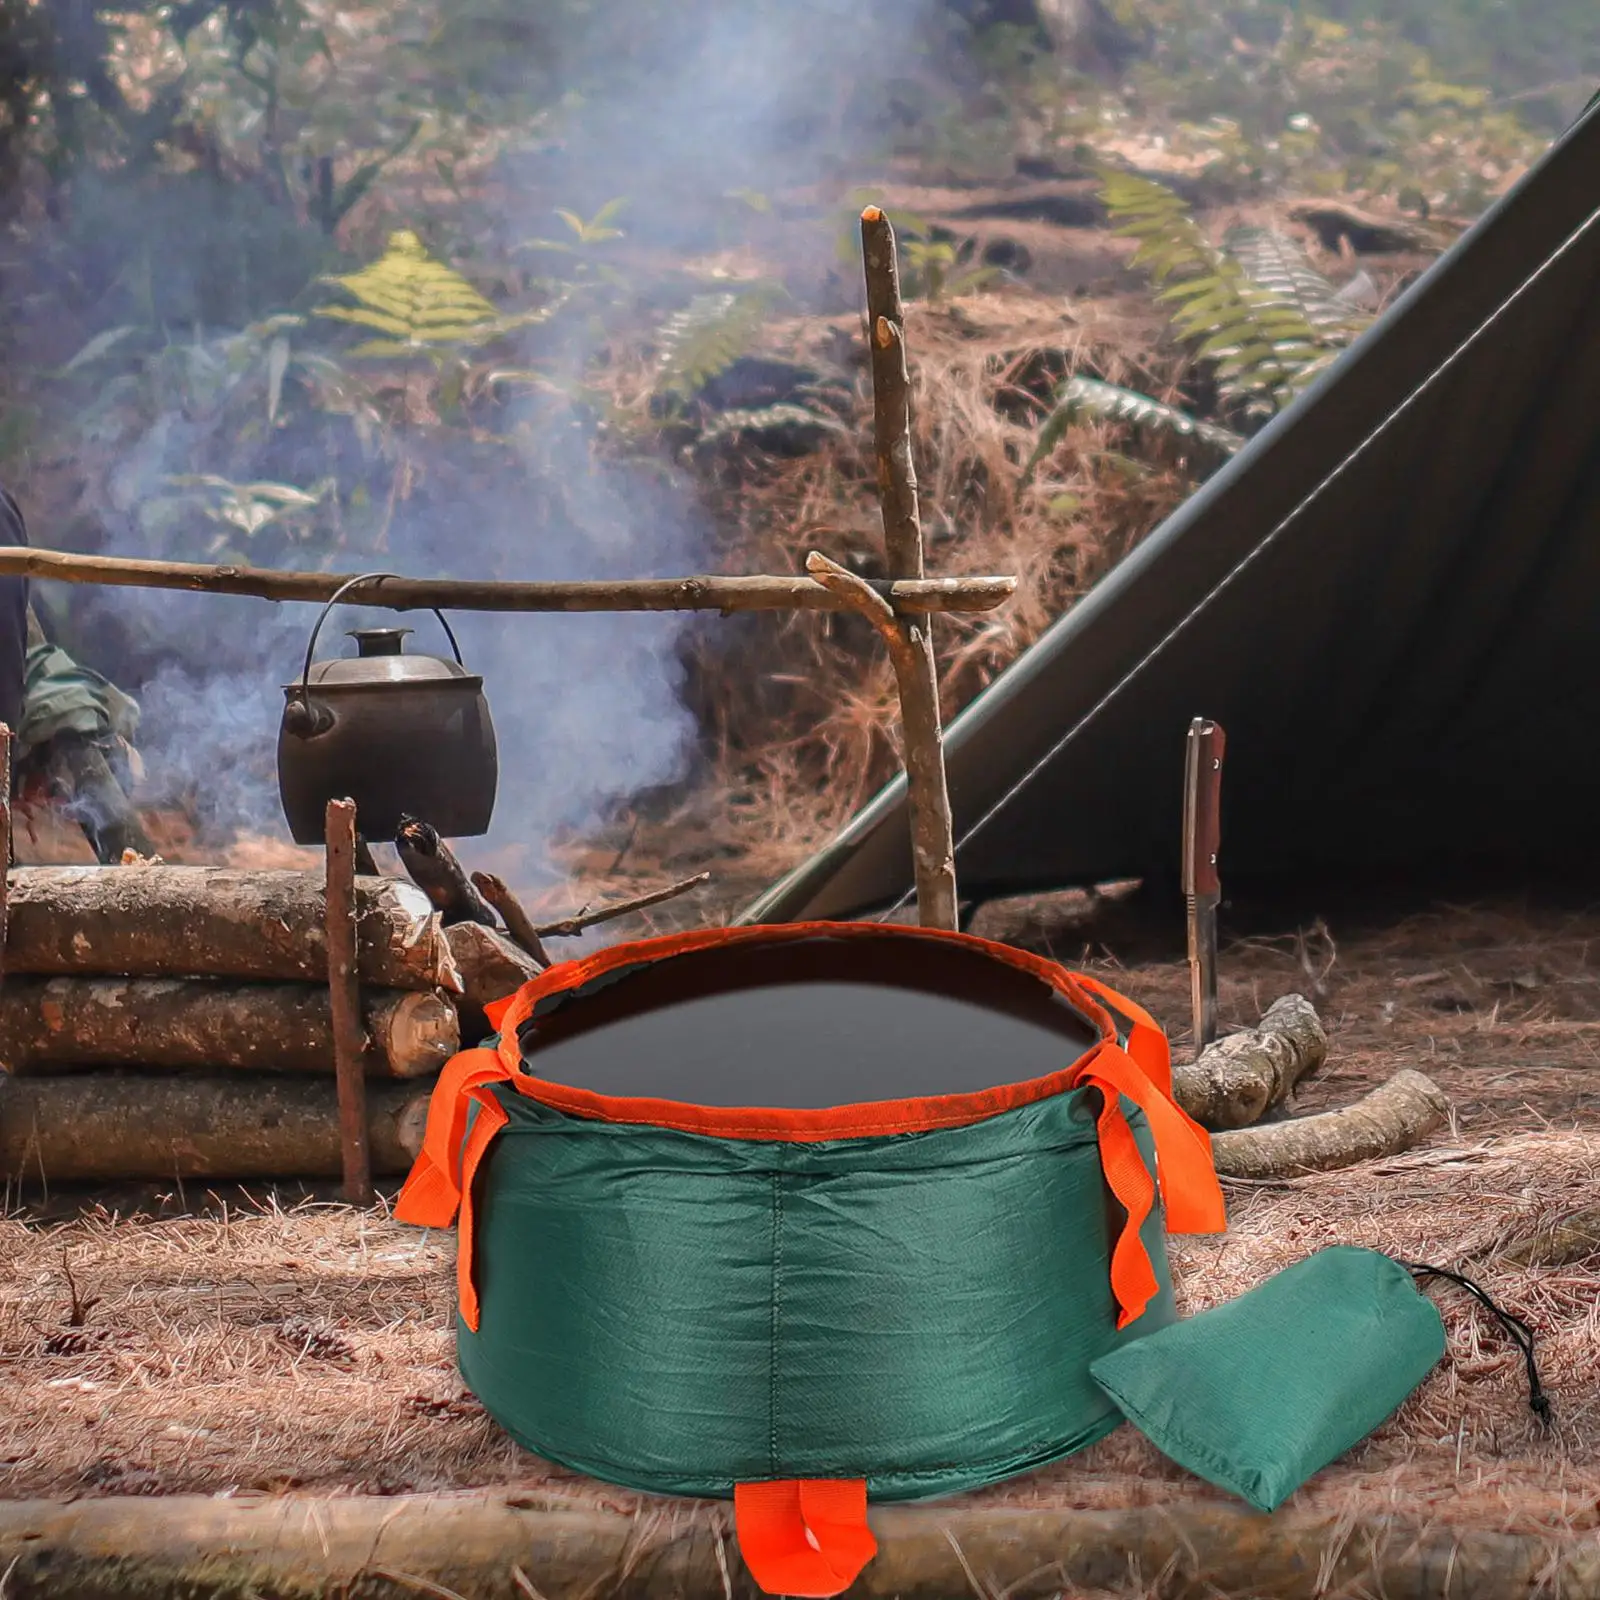 Waterproof Collapsible Water Bucket Wash Basin with Carry Bag Folding Foot Bath for Camping Fishing Survival Backpacking Hiking